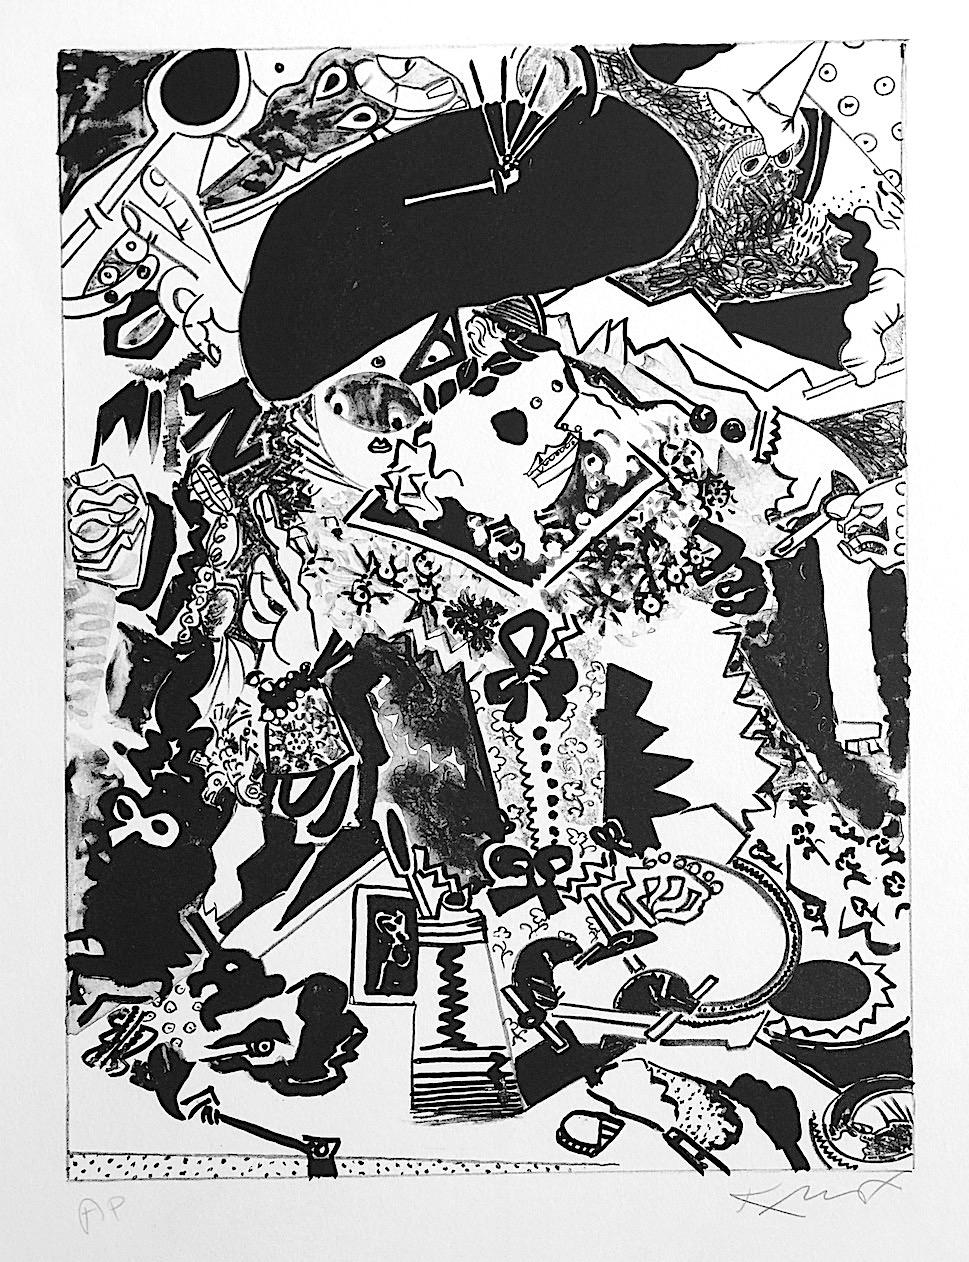 Knox Martin Abstract Print - MERRY COMPANY IV(after Hals) Signed Lithograph, Abstract Portrait, Black Shapes